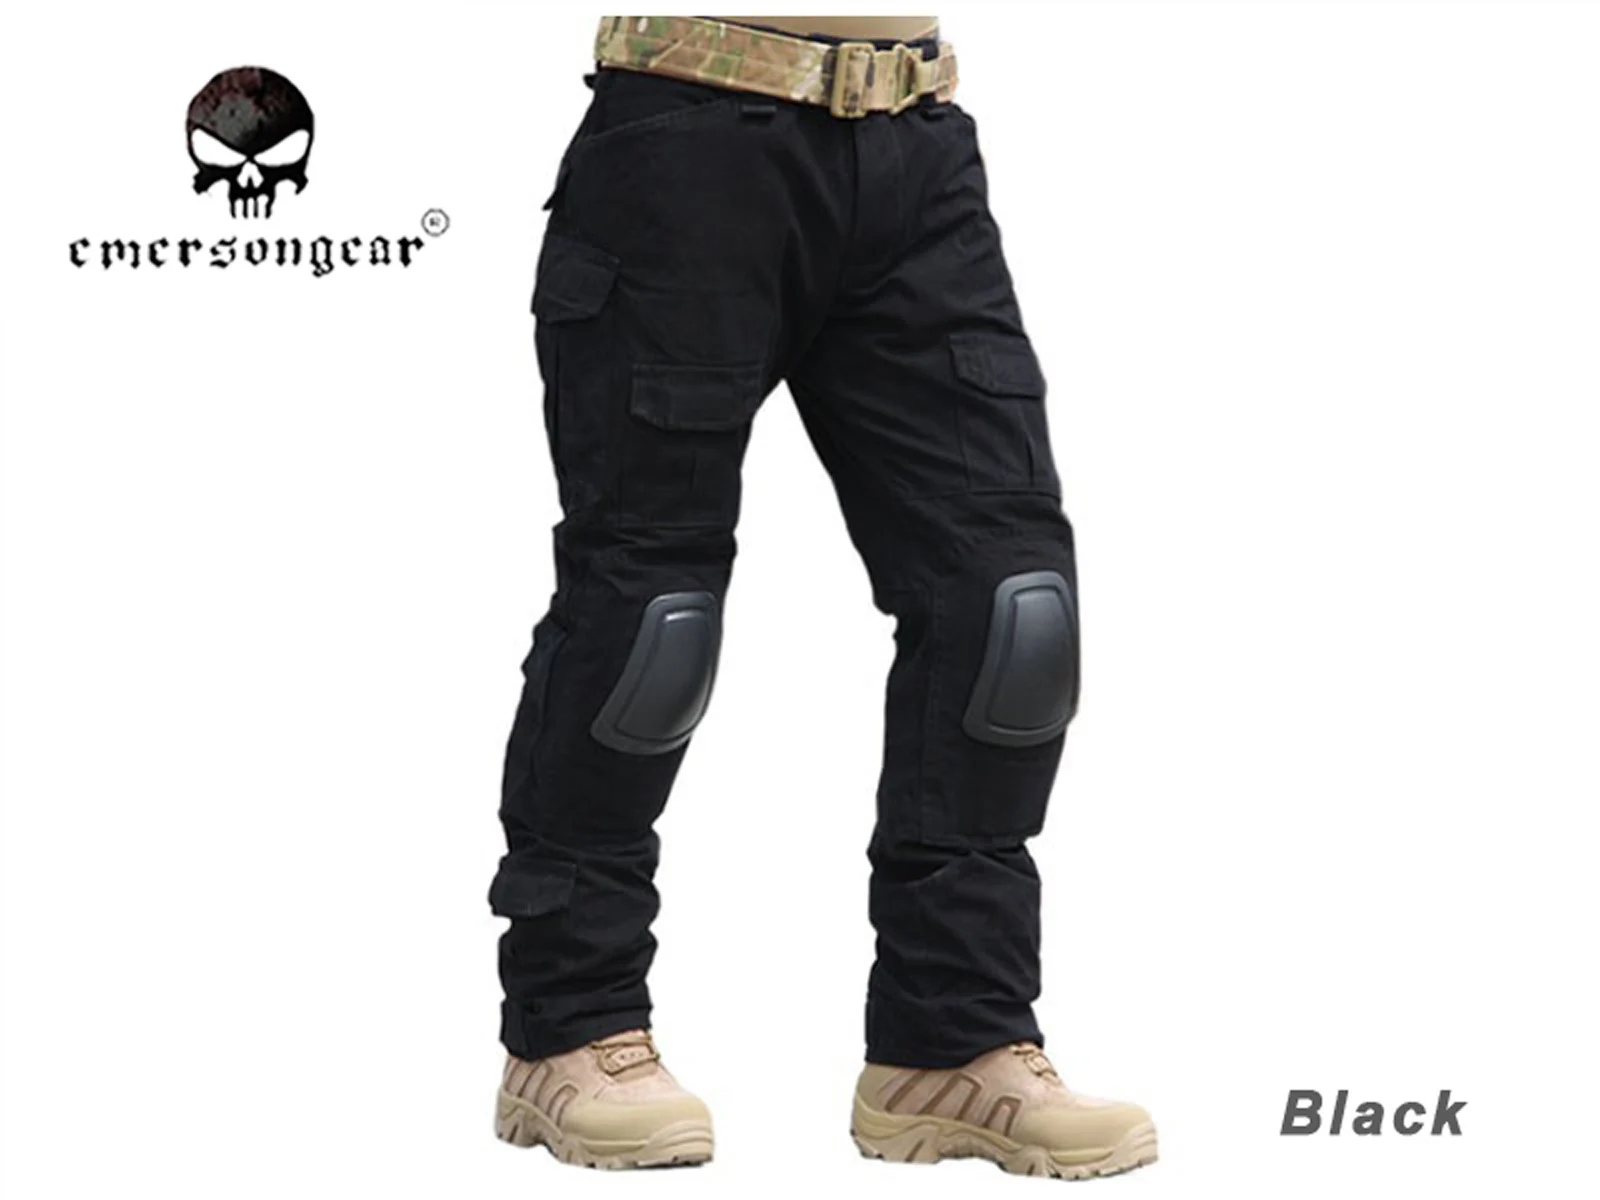 EMERSON Gen2 Tactical Pants Army Military Combat bdu Trousers with Knee Pads Black EM6988